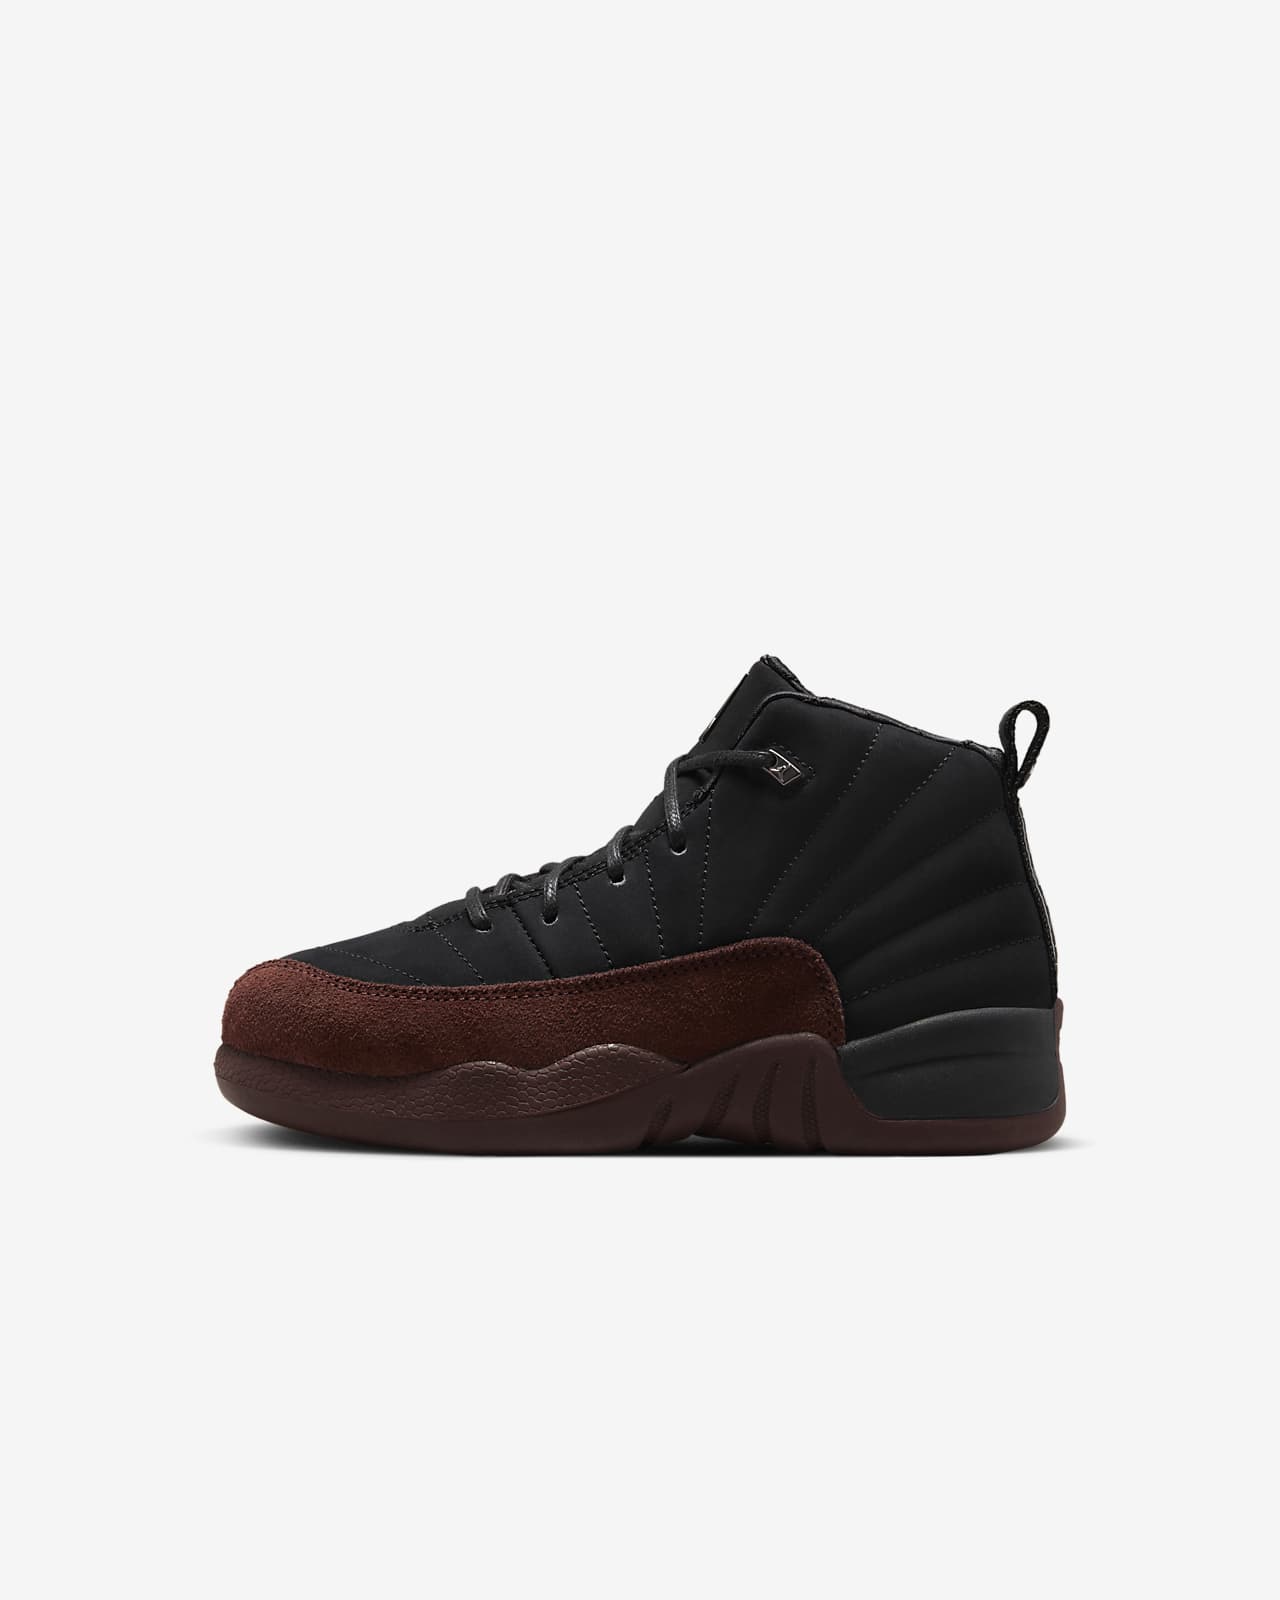 Jordan 12 x A Ma Maniére Younger Kids' Shoes